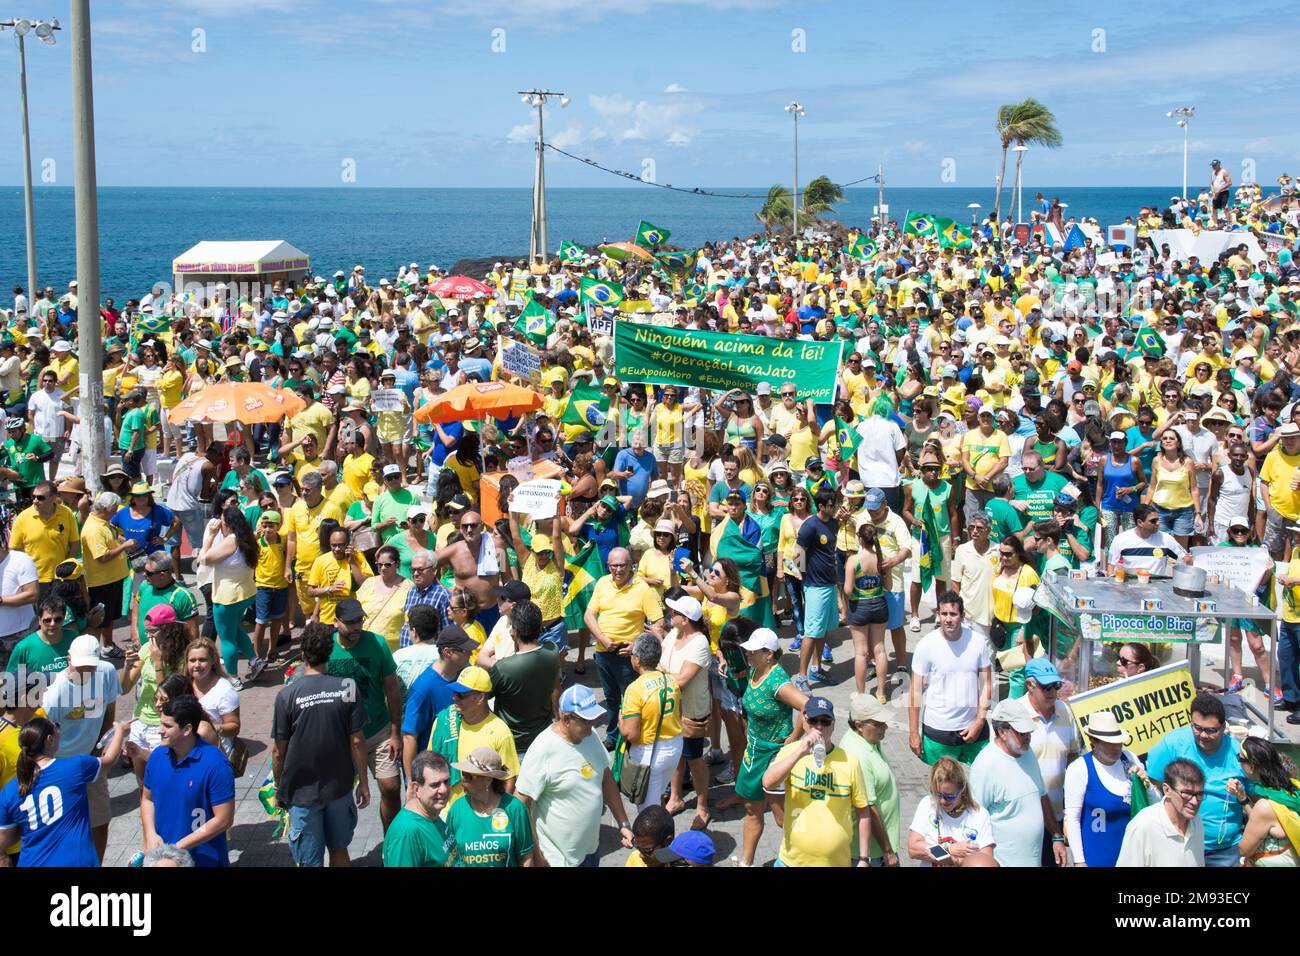 Salvador, Bahia, Brazil - March 13, 2016: Big crowd of activists with Brazilian flags attend a demonstration for the impeachment of Dilma Rousseff Stock Photo